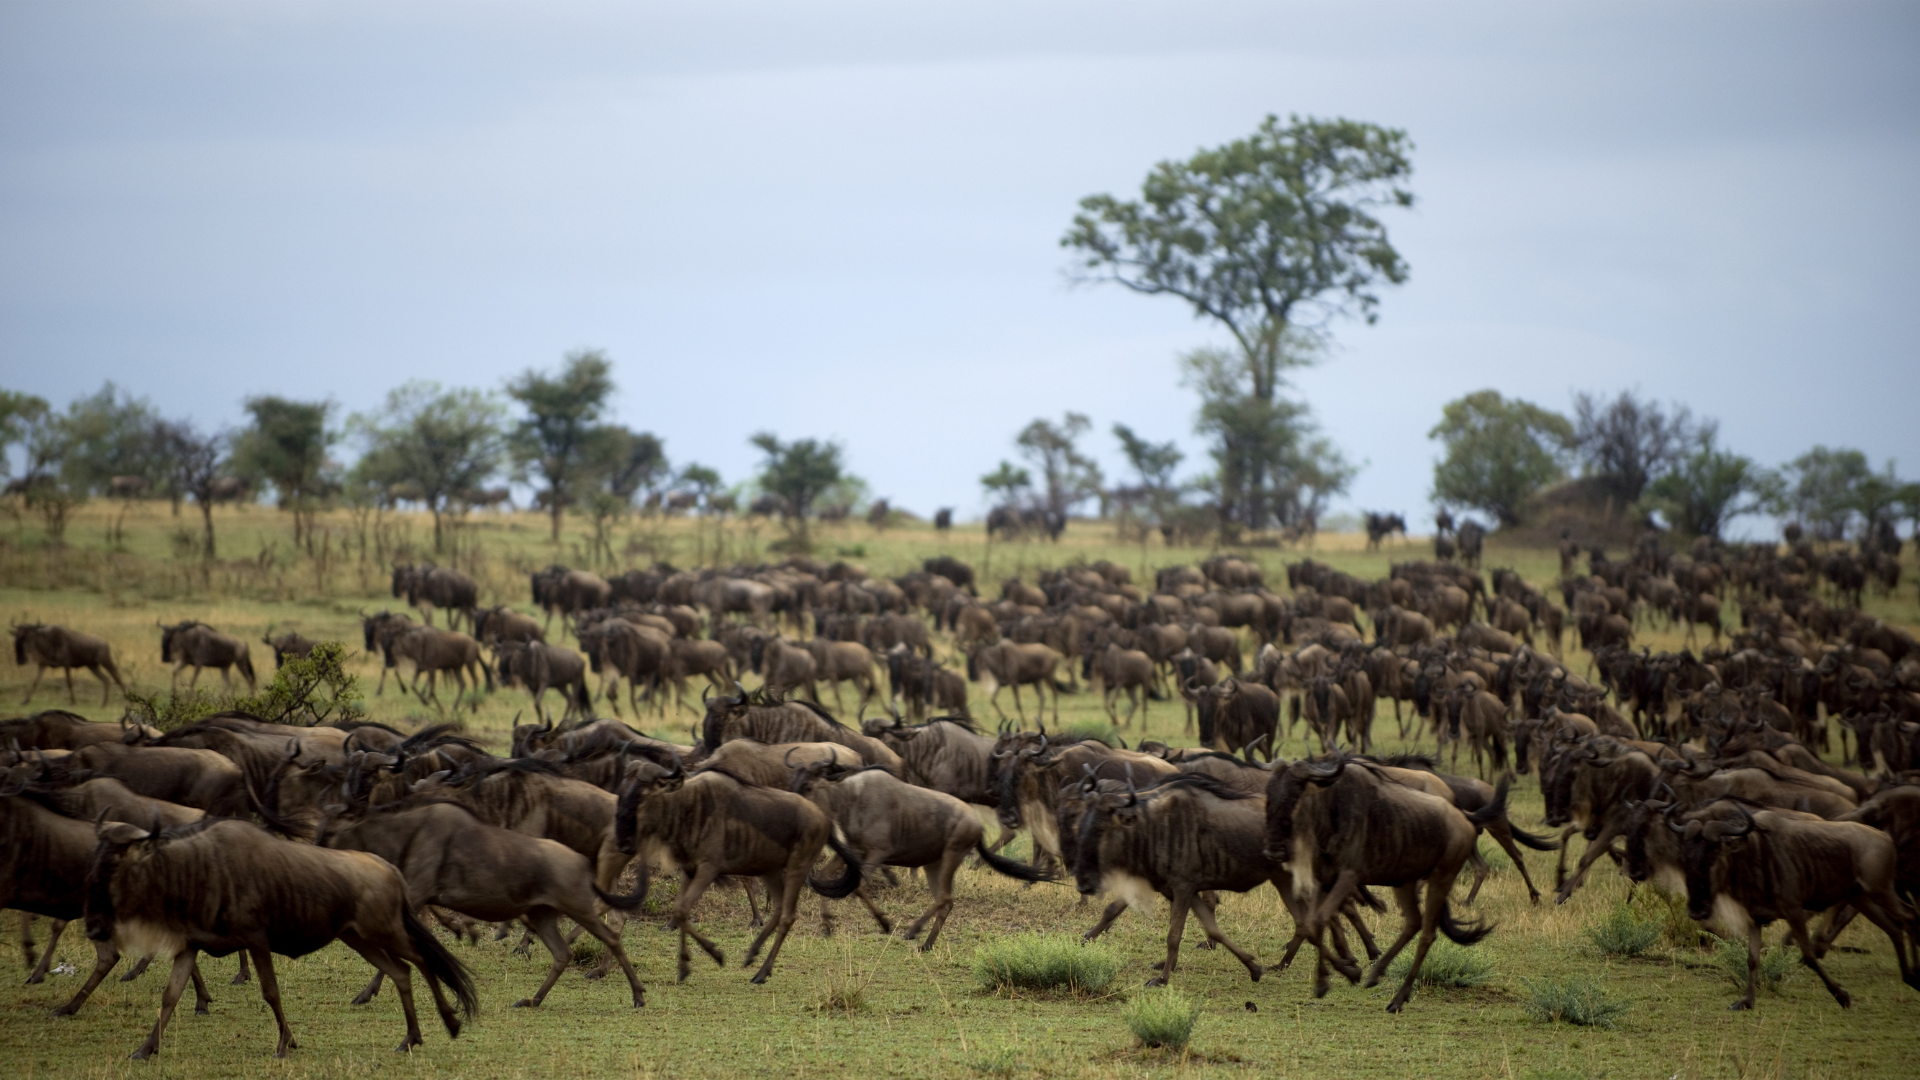 Embark on an unforgettable safari adventure in the vast plains of the Serengeti National Park. Witness the awe-inspiring annual migration of wildebeest and zebras, spot majestic lions roaming freely, and observe the vibrant ecosystem teeming with wildlife. Let the serenity and raw beauty of the African savannah mesmerize you.